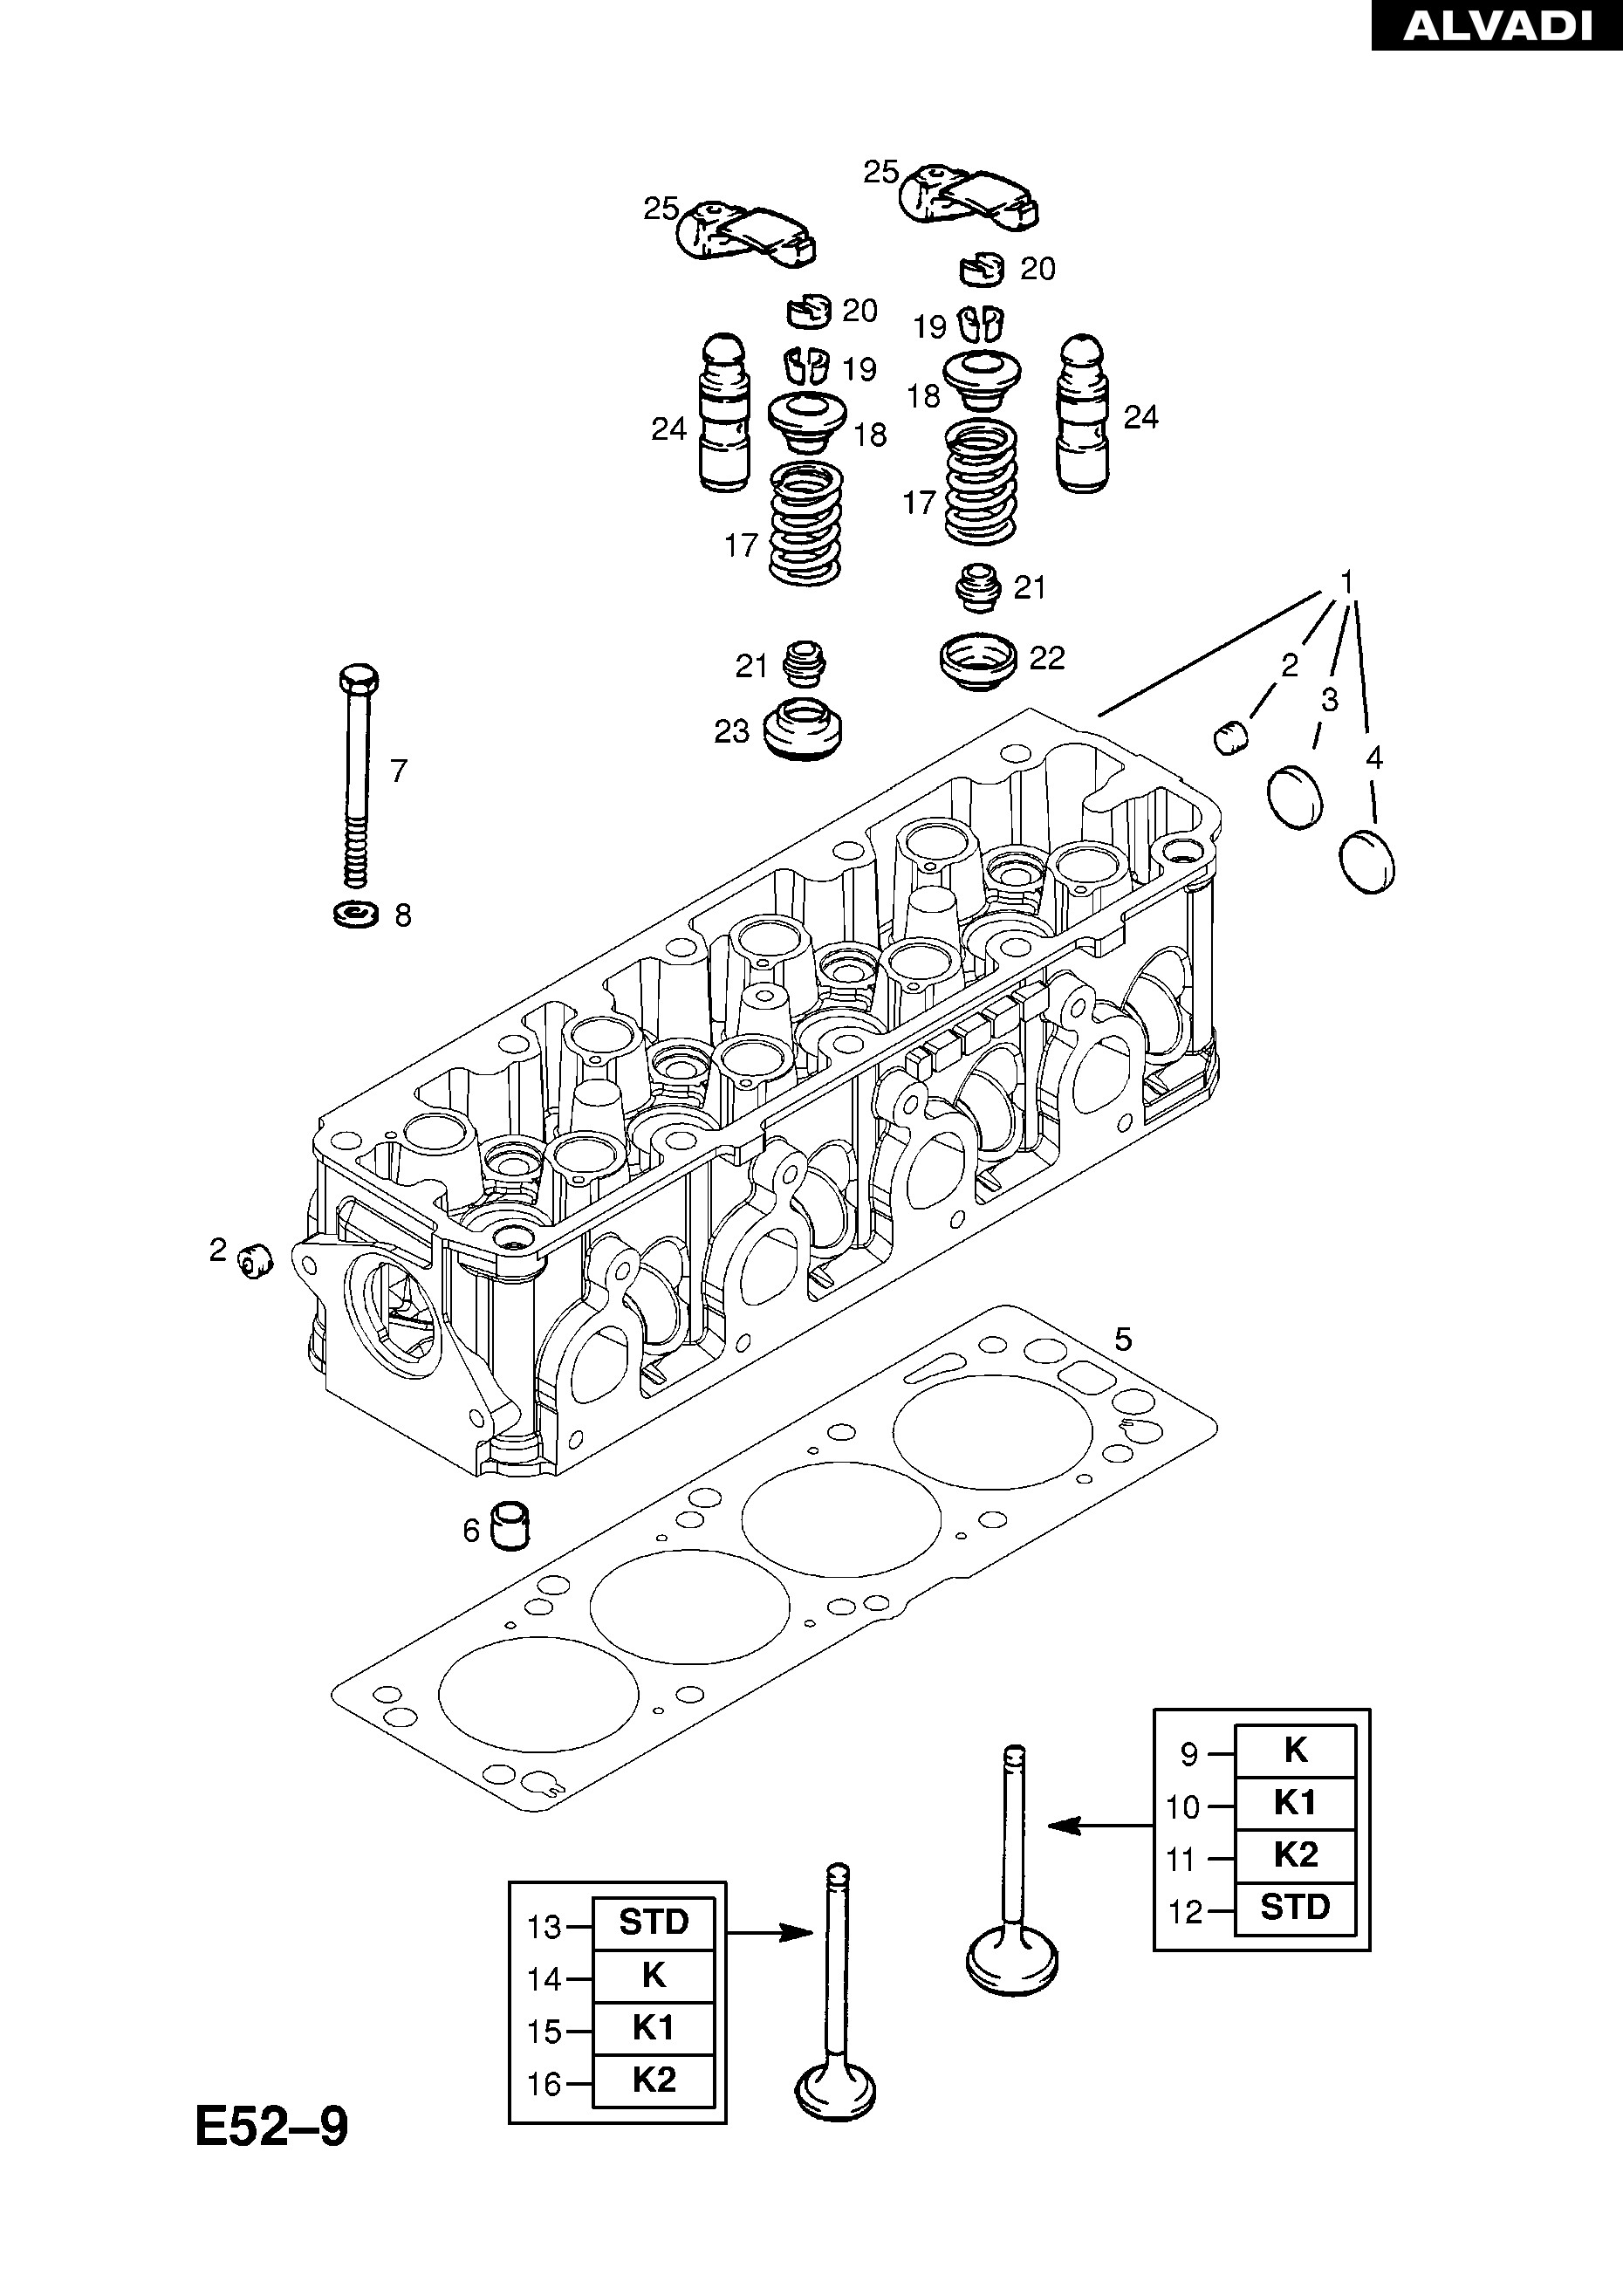 Vauxhall astra Engine Parts Diagram Opel Petrol Engine Cylinder Head Plugs and Gasket Of Vauxhall astra Engine Parts Diagram